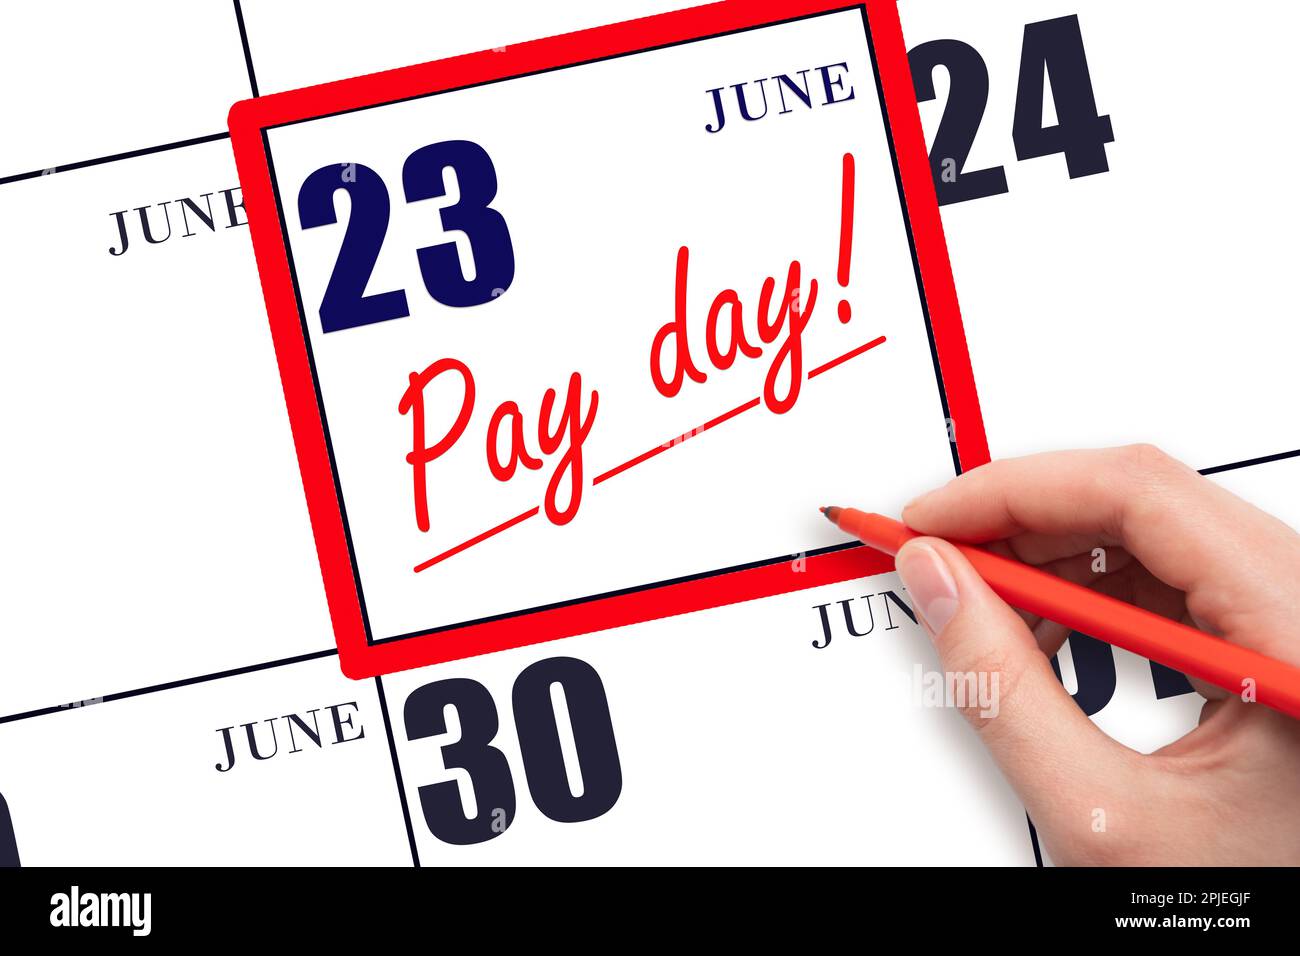 23rd day of June. Hand writing text PAY DATE on calendar date June 23 and underline it. Payment due date.  Reminder concept of payment. Summer month, Stock Photo